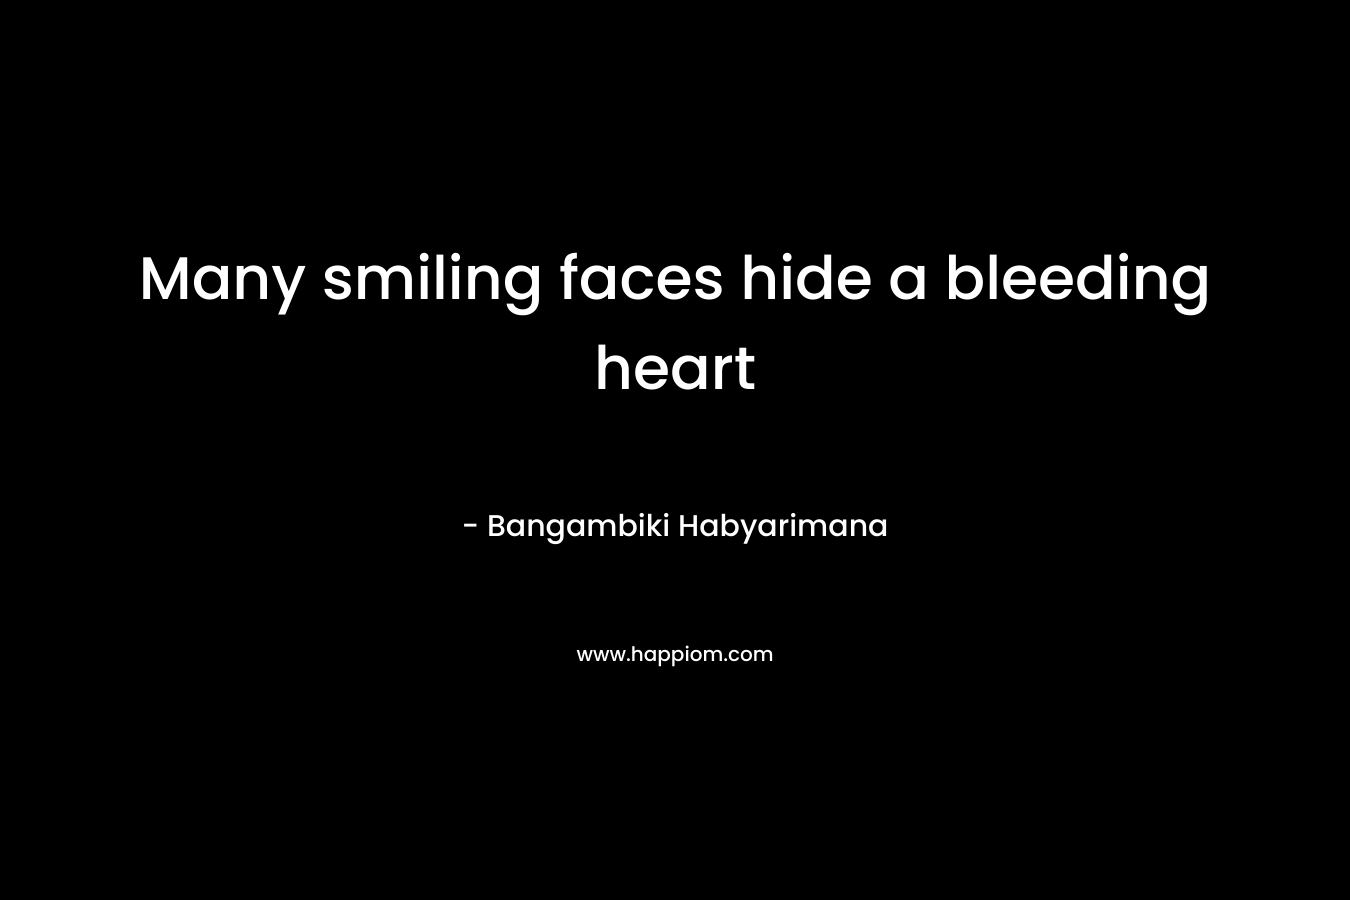 Many smiling faces hide a bleeding heart